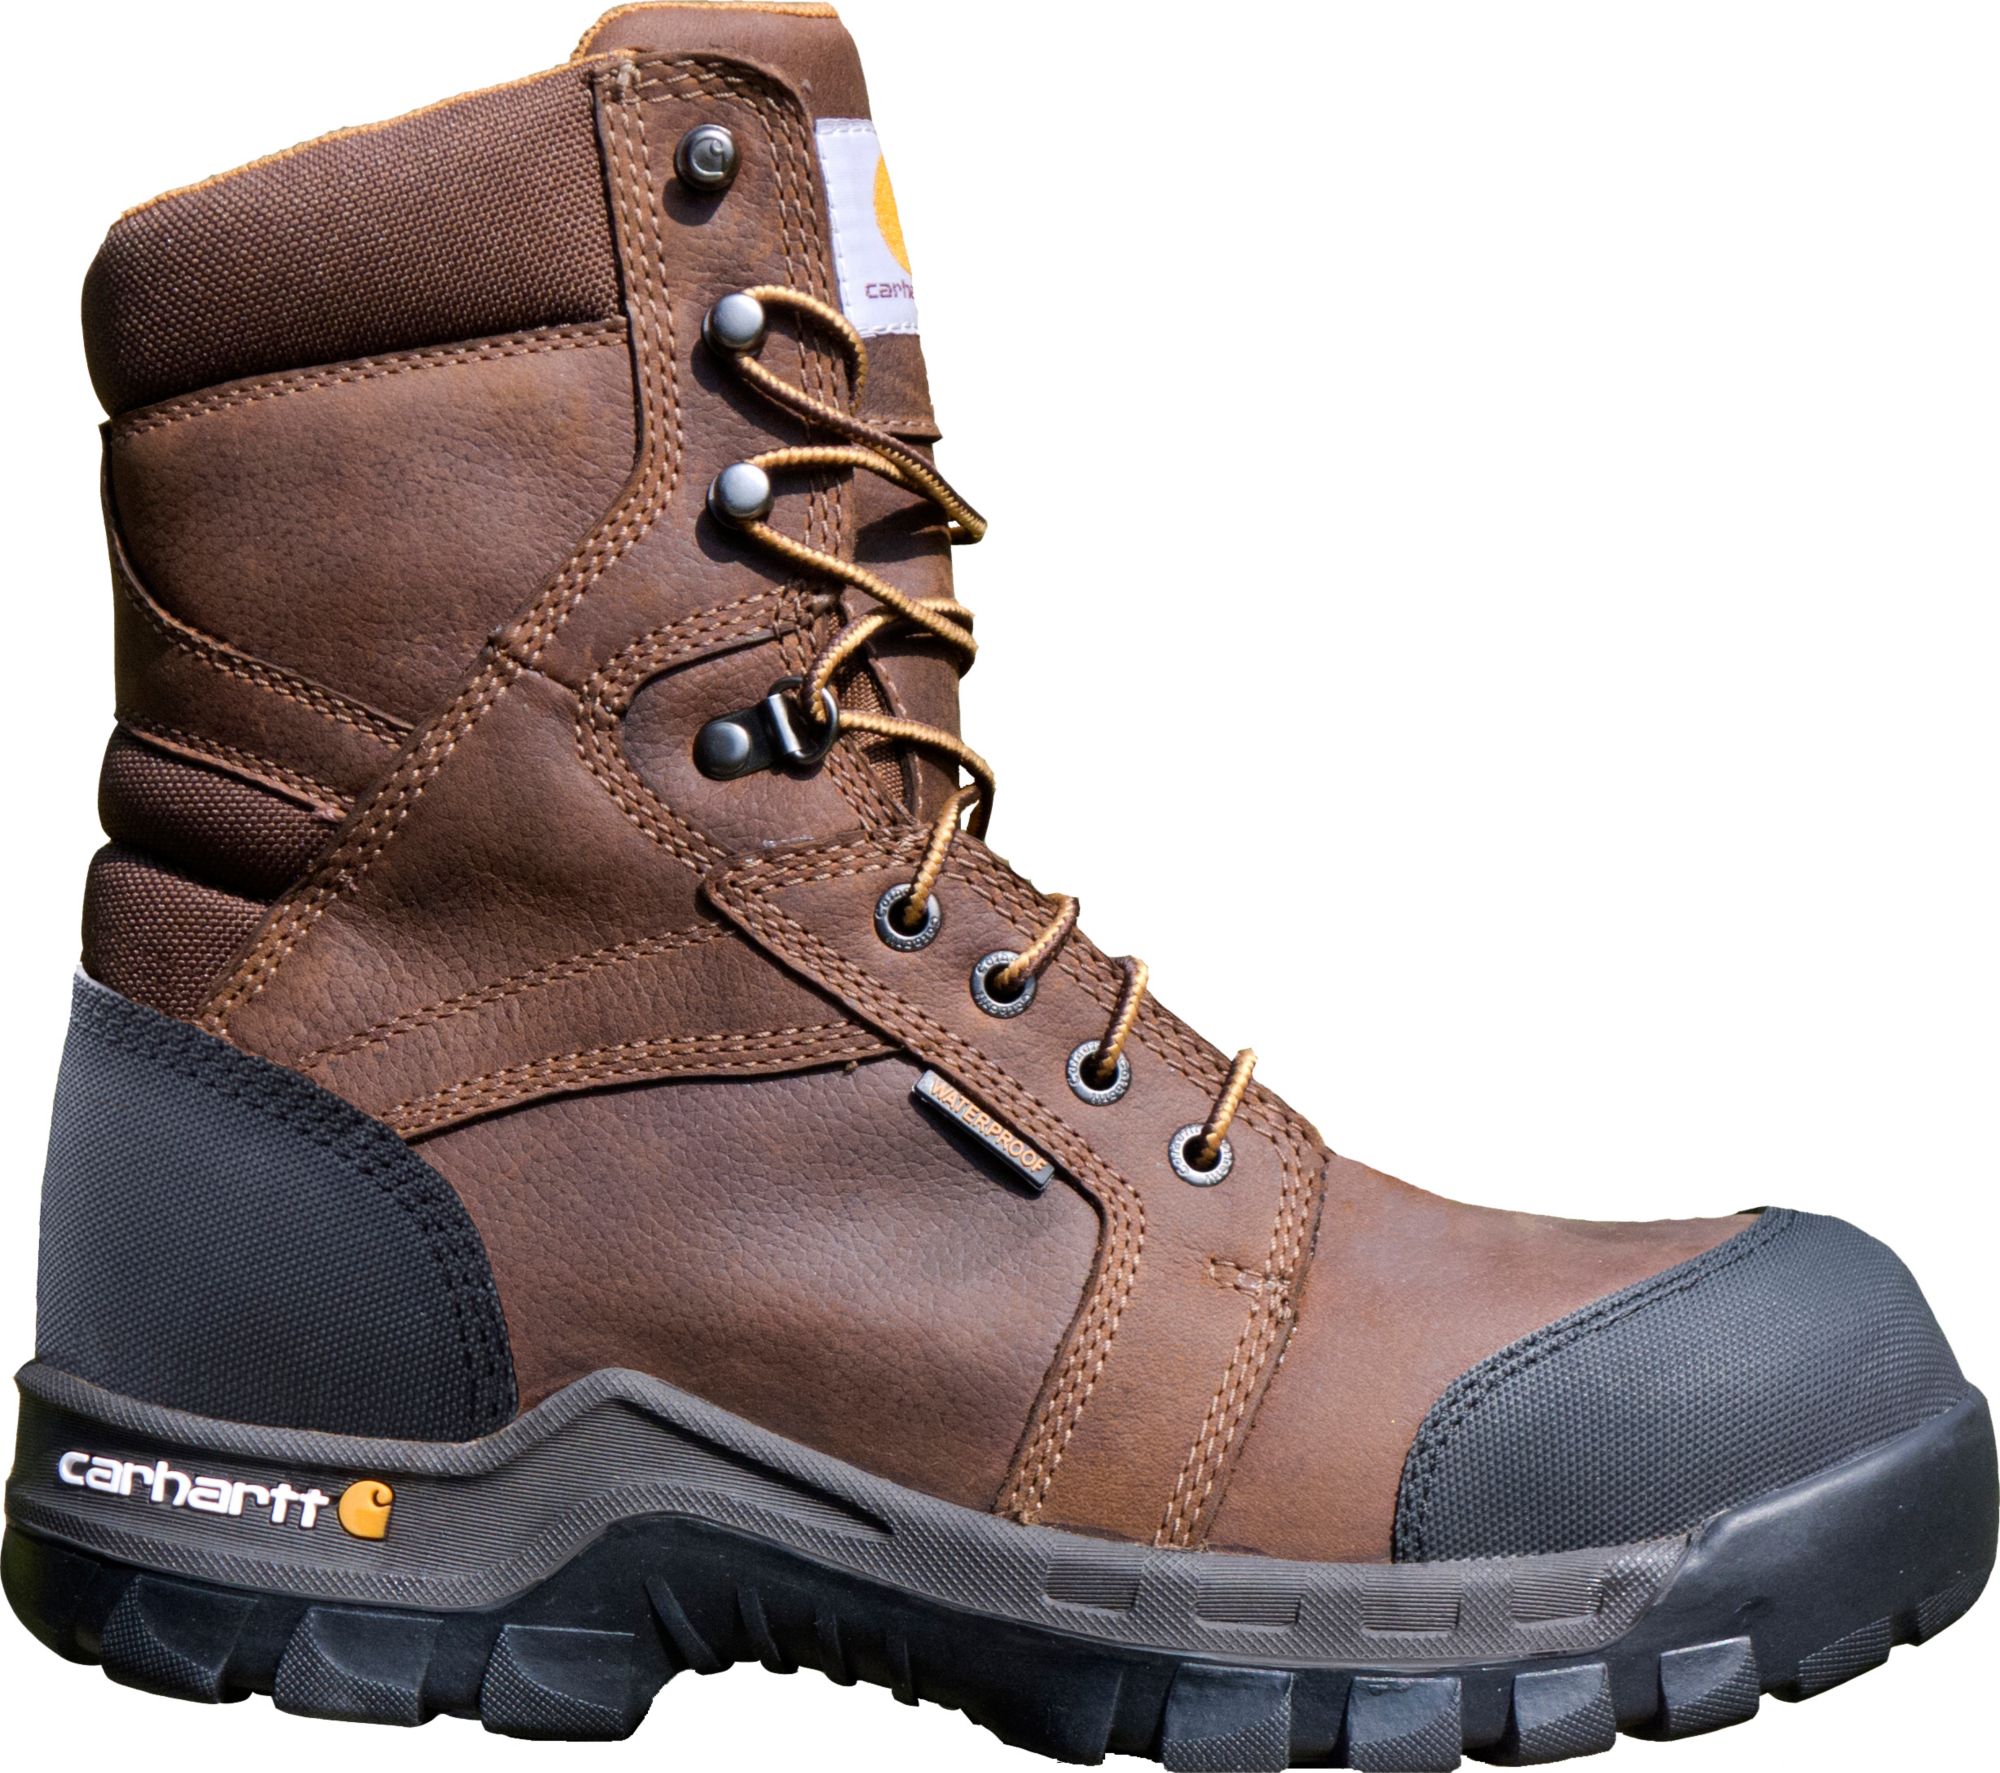 8 composite toe work boots